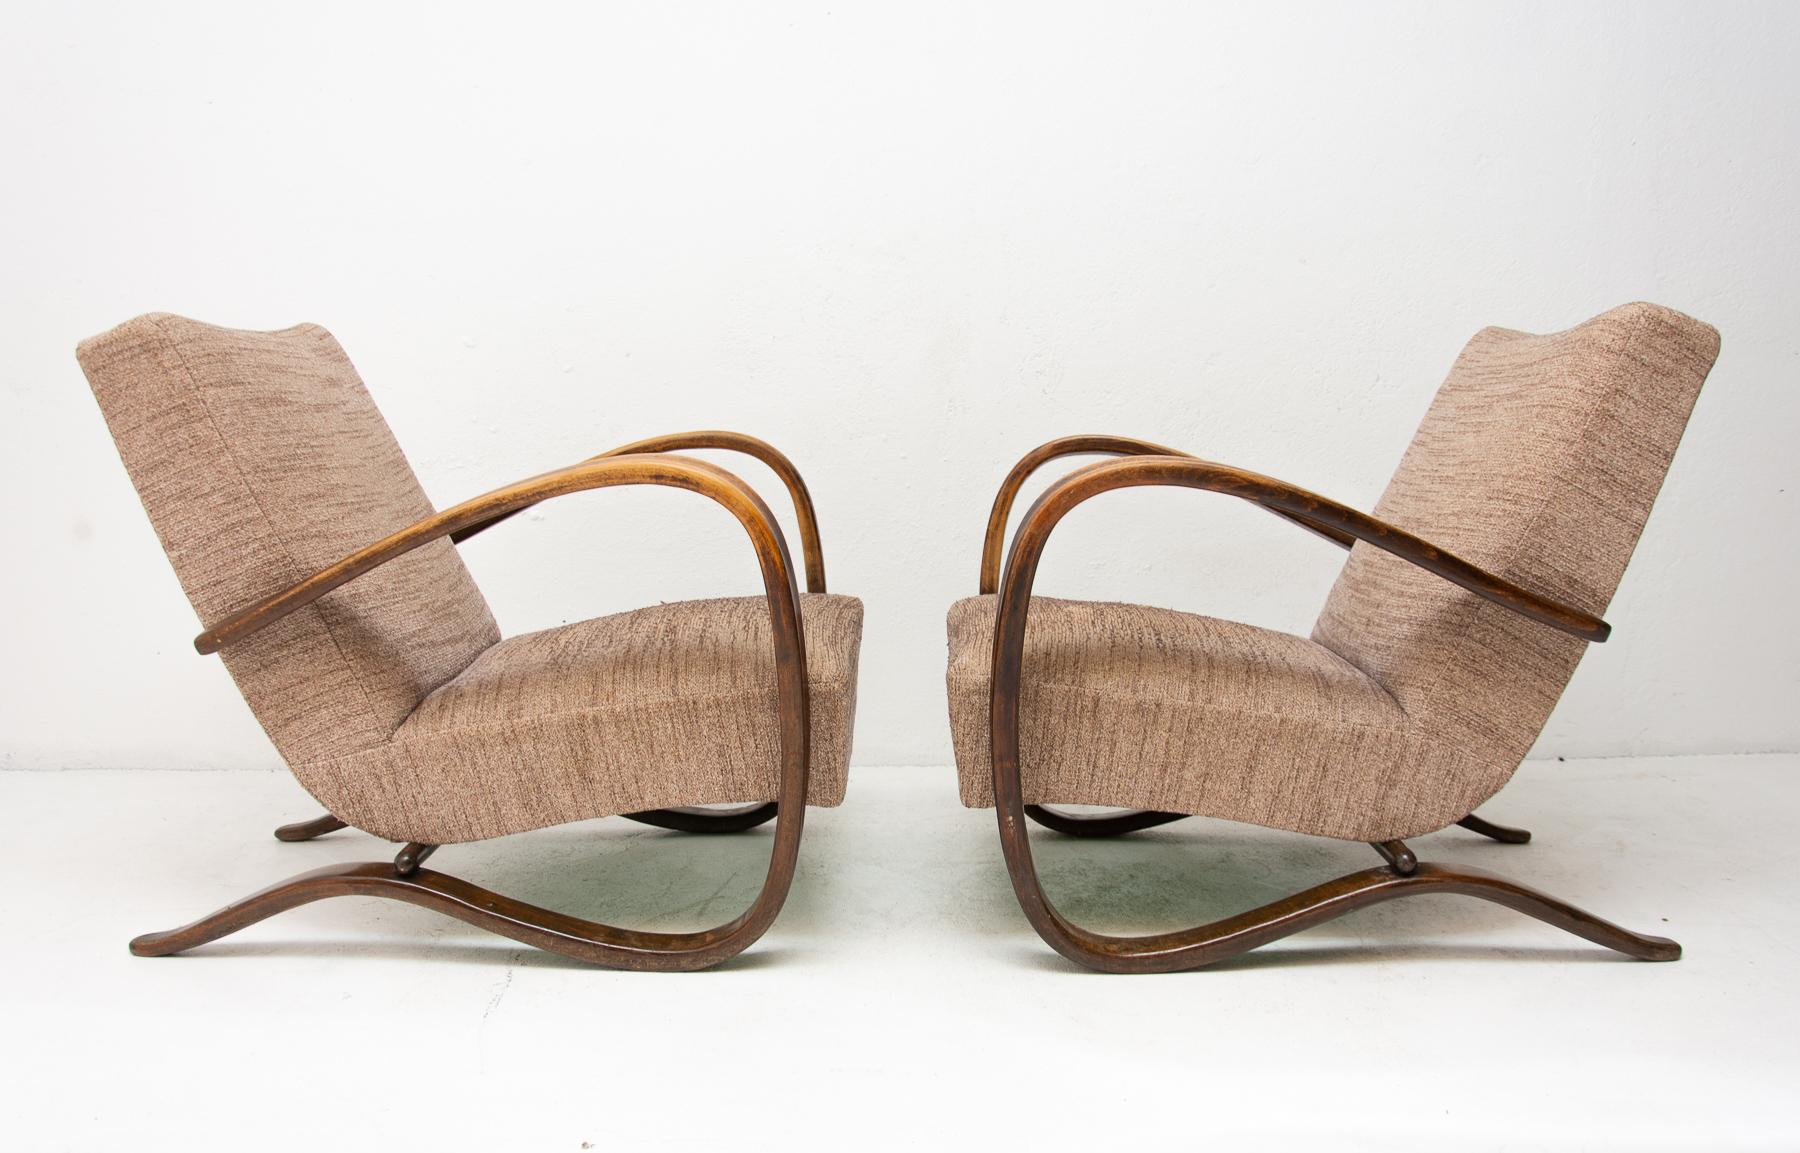 Czech Pair of H-269 Armchairs Designed by Jindrich Halabala, 1930s